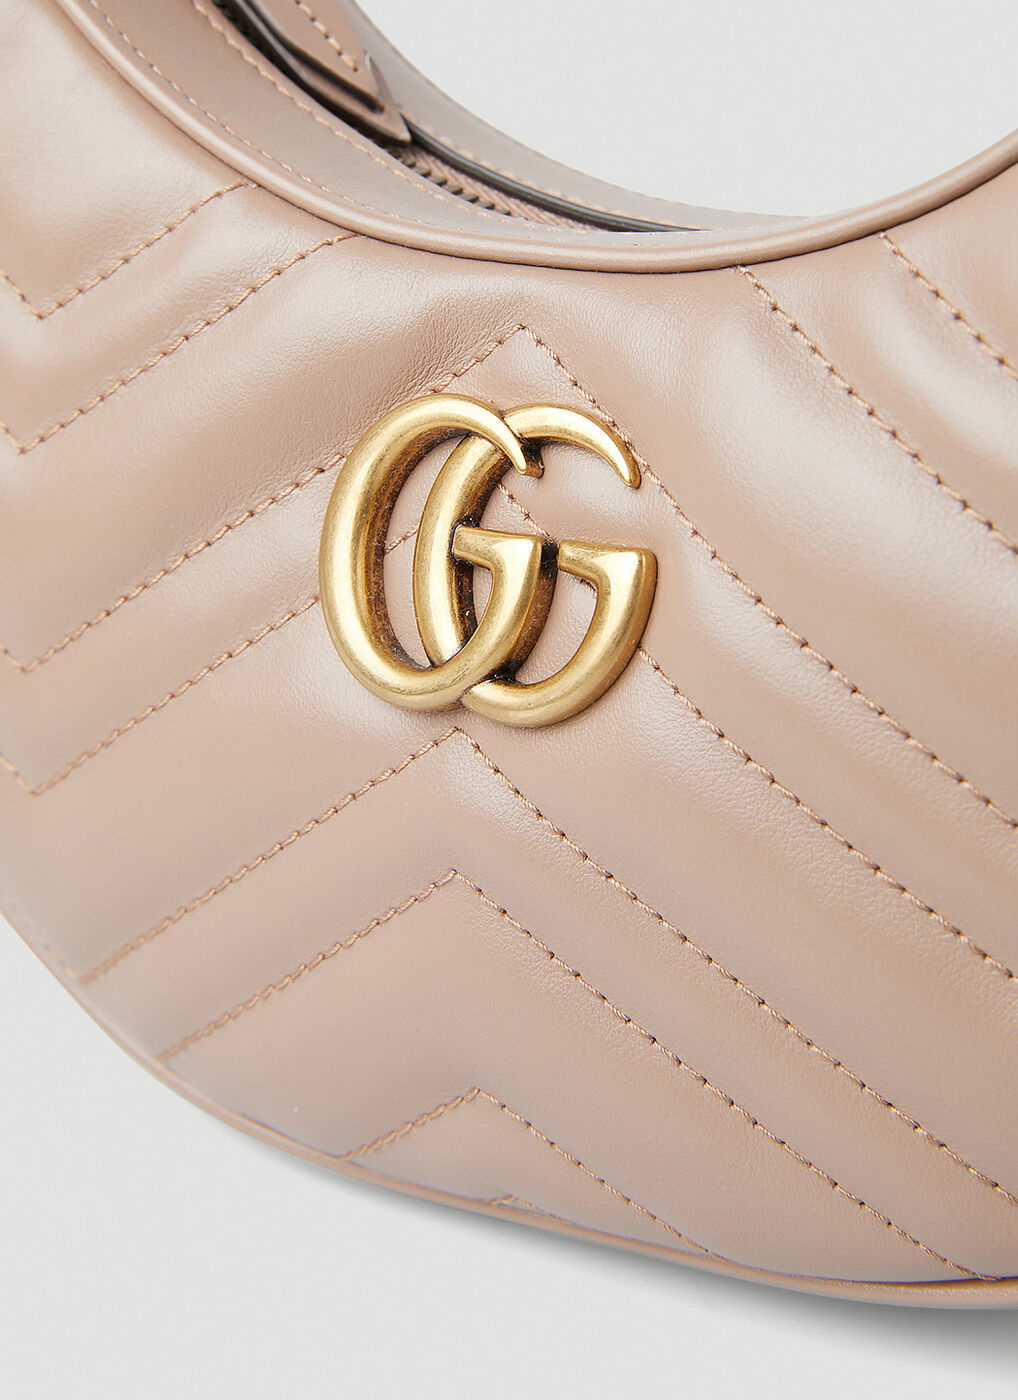 Gucci GG Marmont Half Moon Shaped Mini Bag 'Porcel Rose' | Pink | Women's Size Onesize